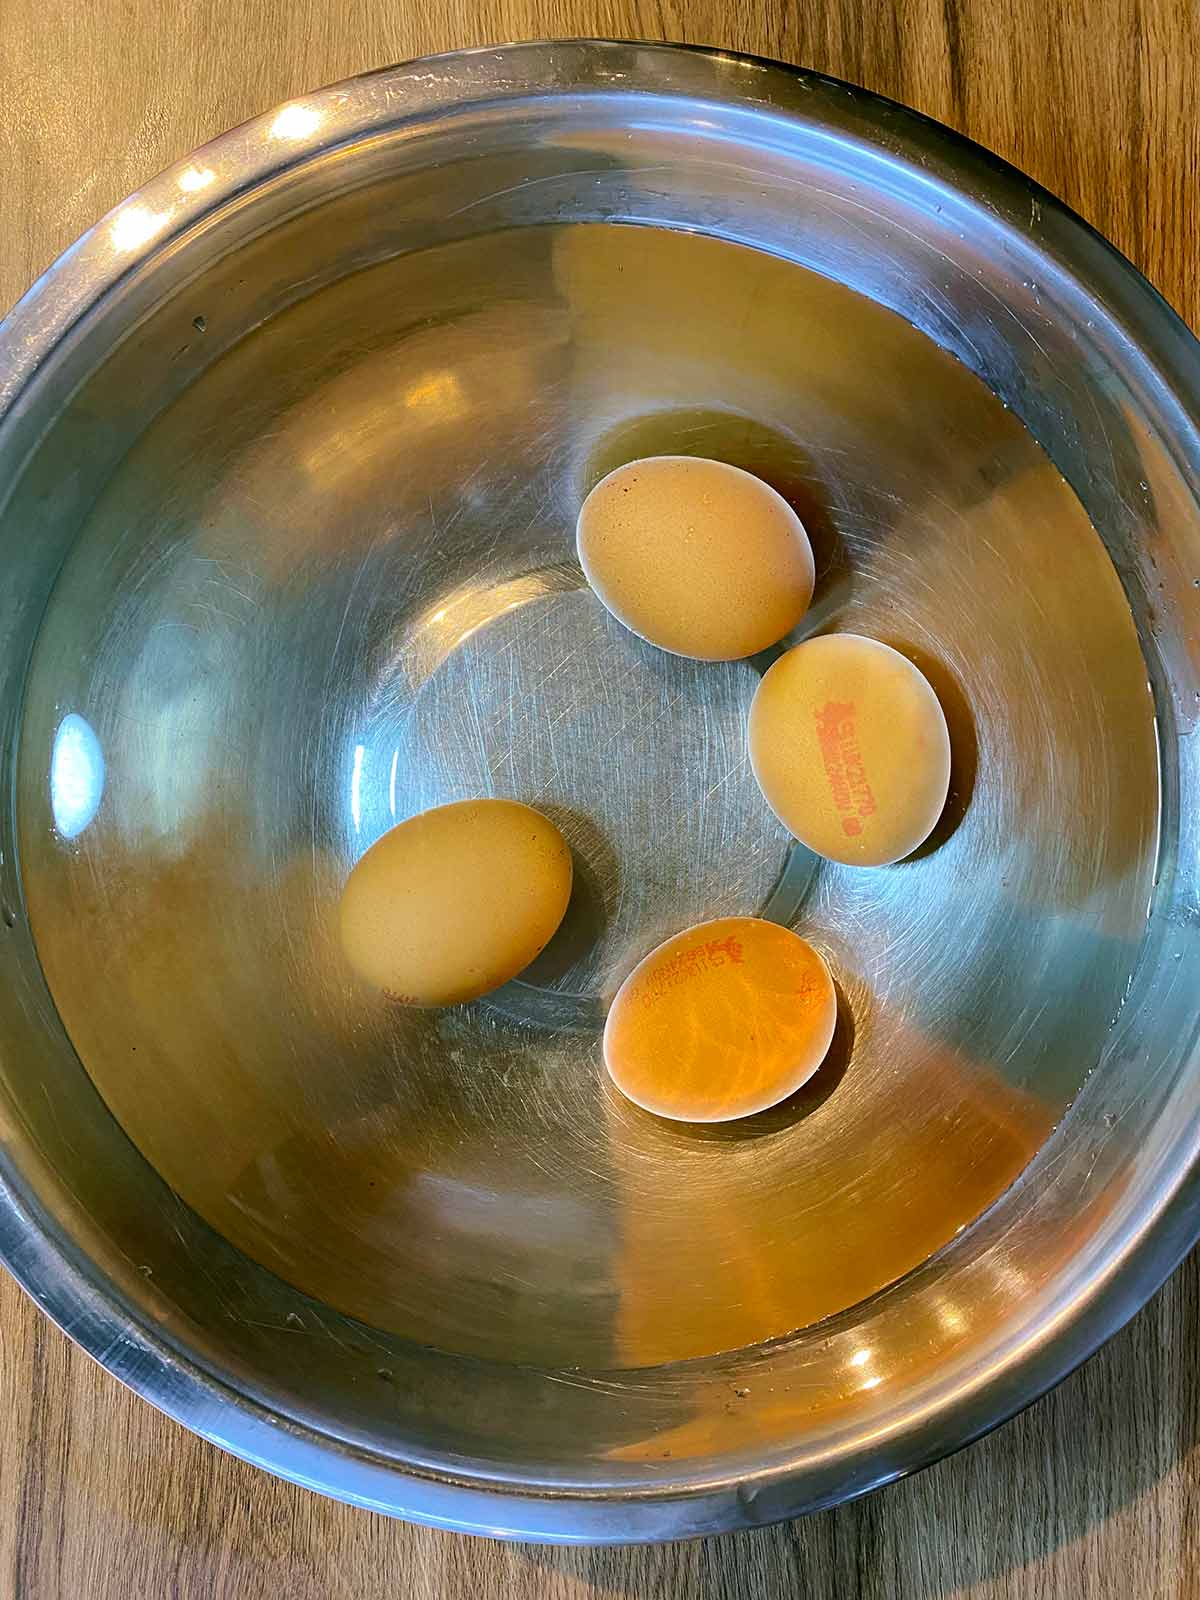 Four eggs in a bowl of water.